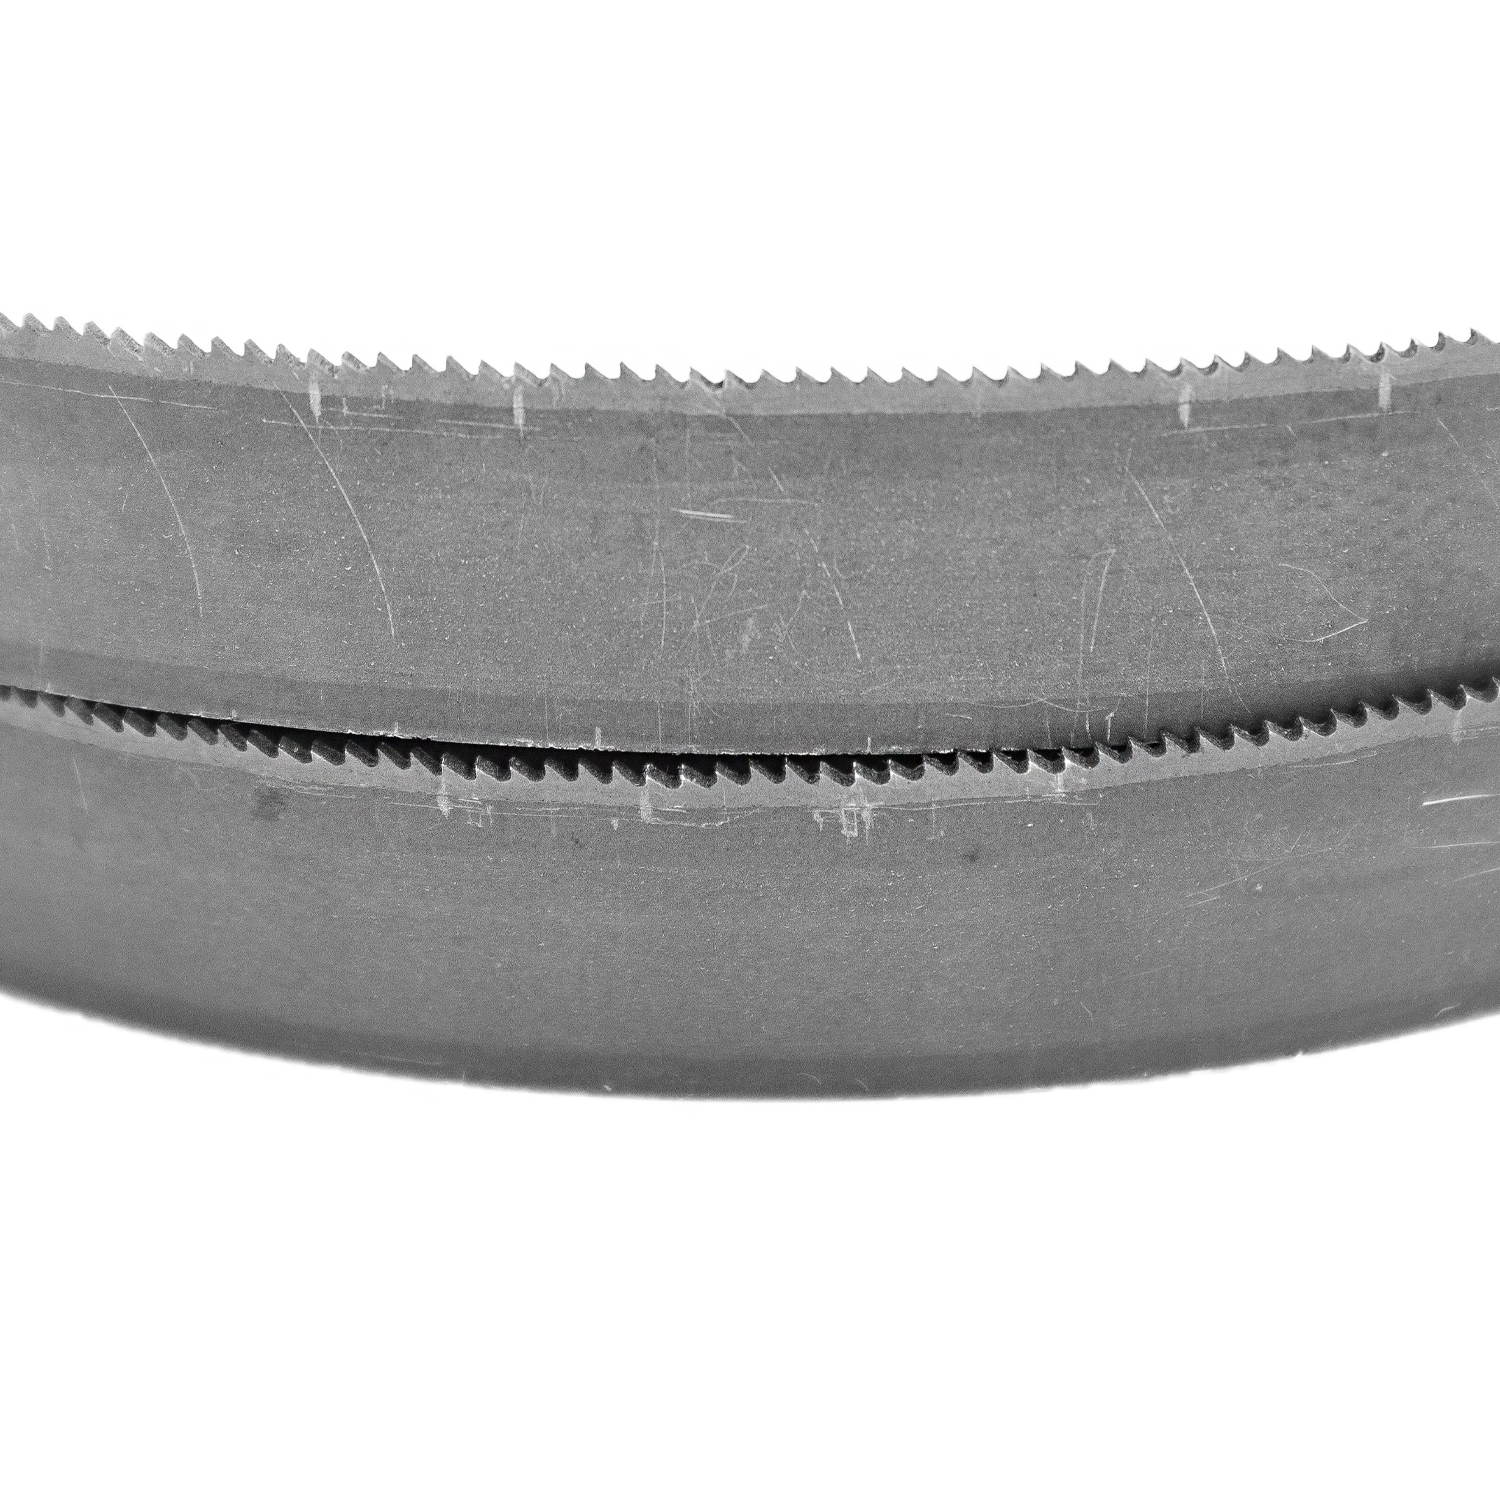 Pipeworker band saw blade 835.00mm